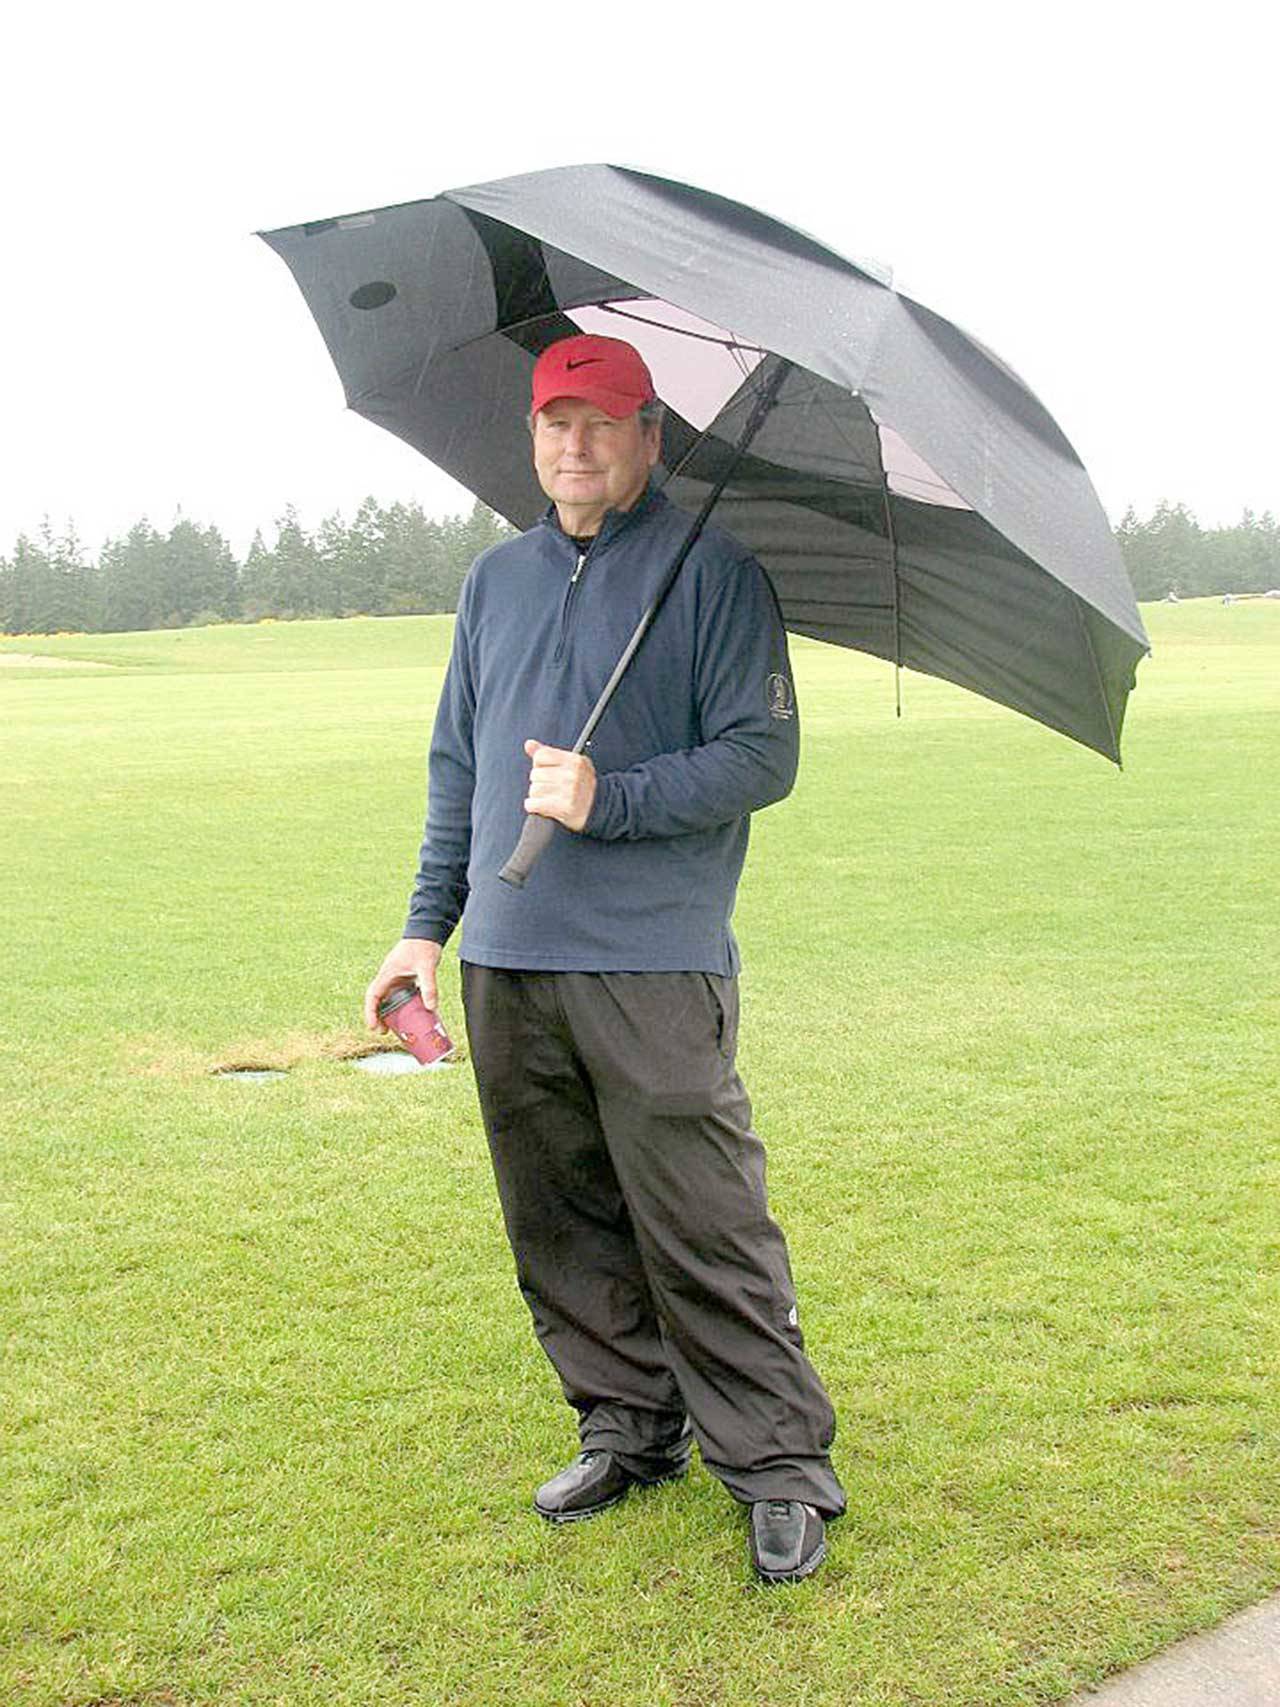 Mitch Black, a longtime Chimacum School District educator and founder and coach of the Chimacum High School golf program for 39 years, died last month in Thailand.